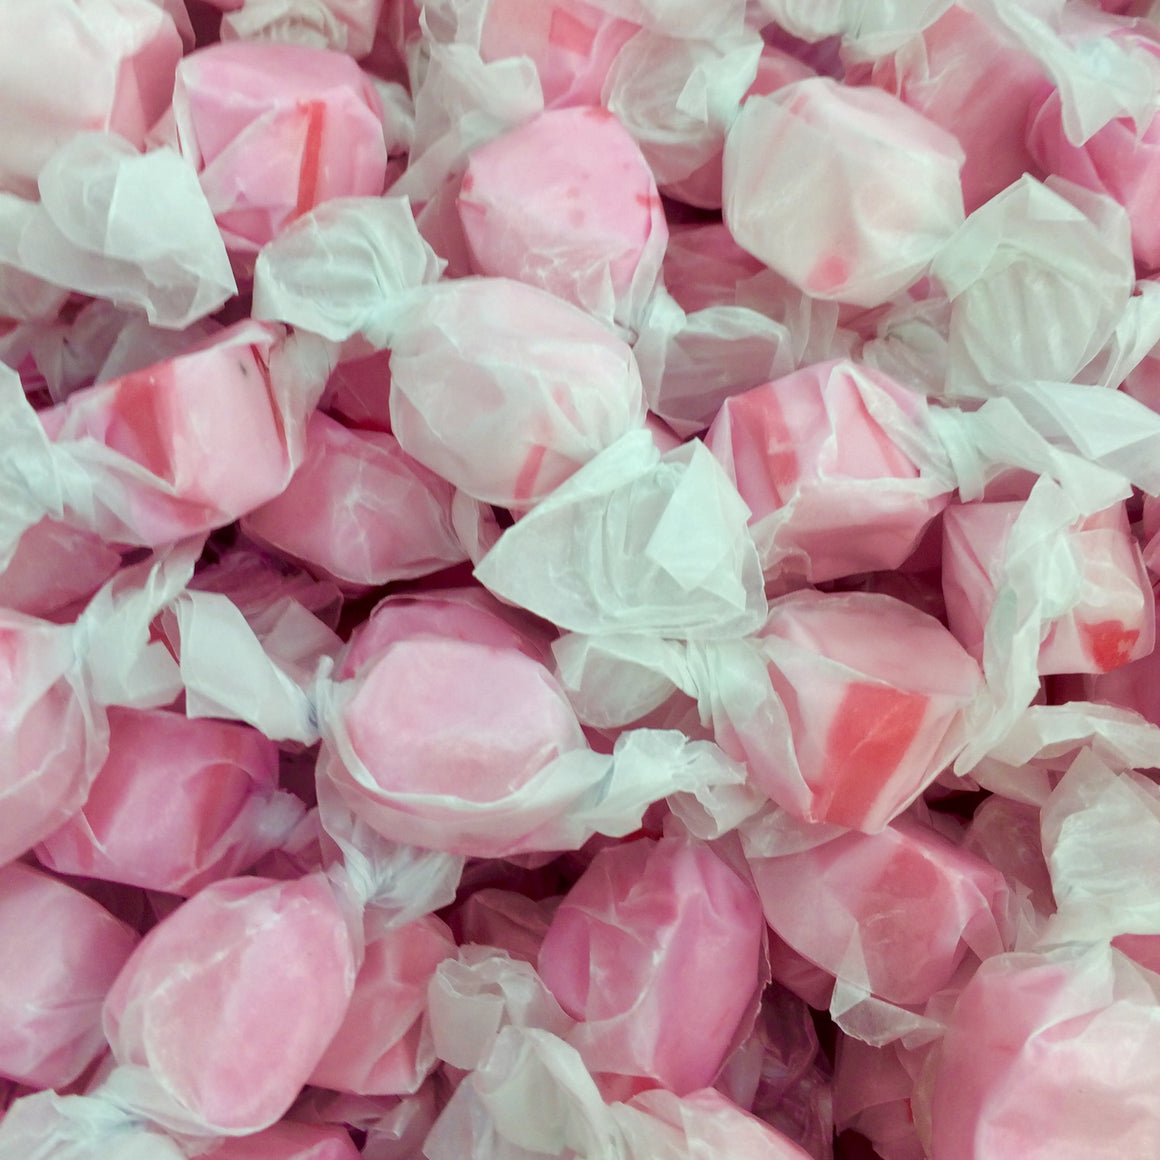 SWEETS TAFFY STRAWBERRY 1360G